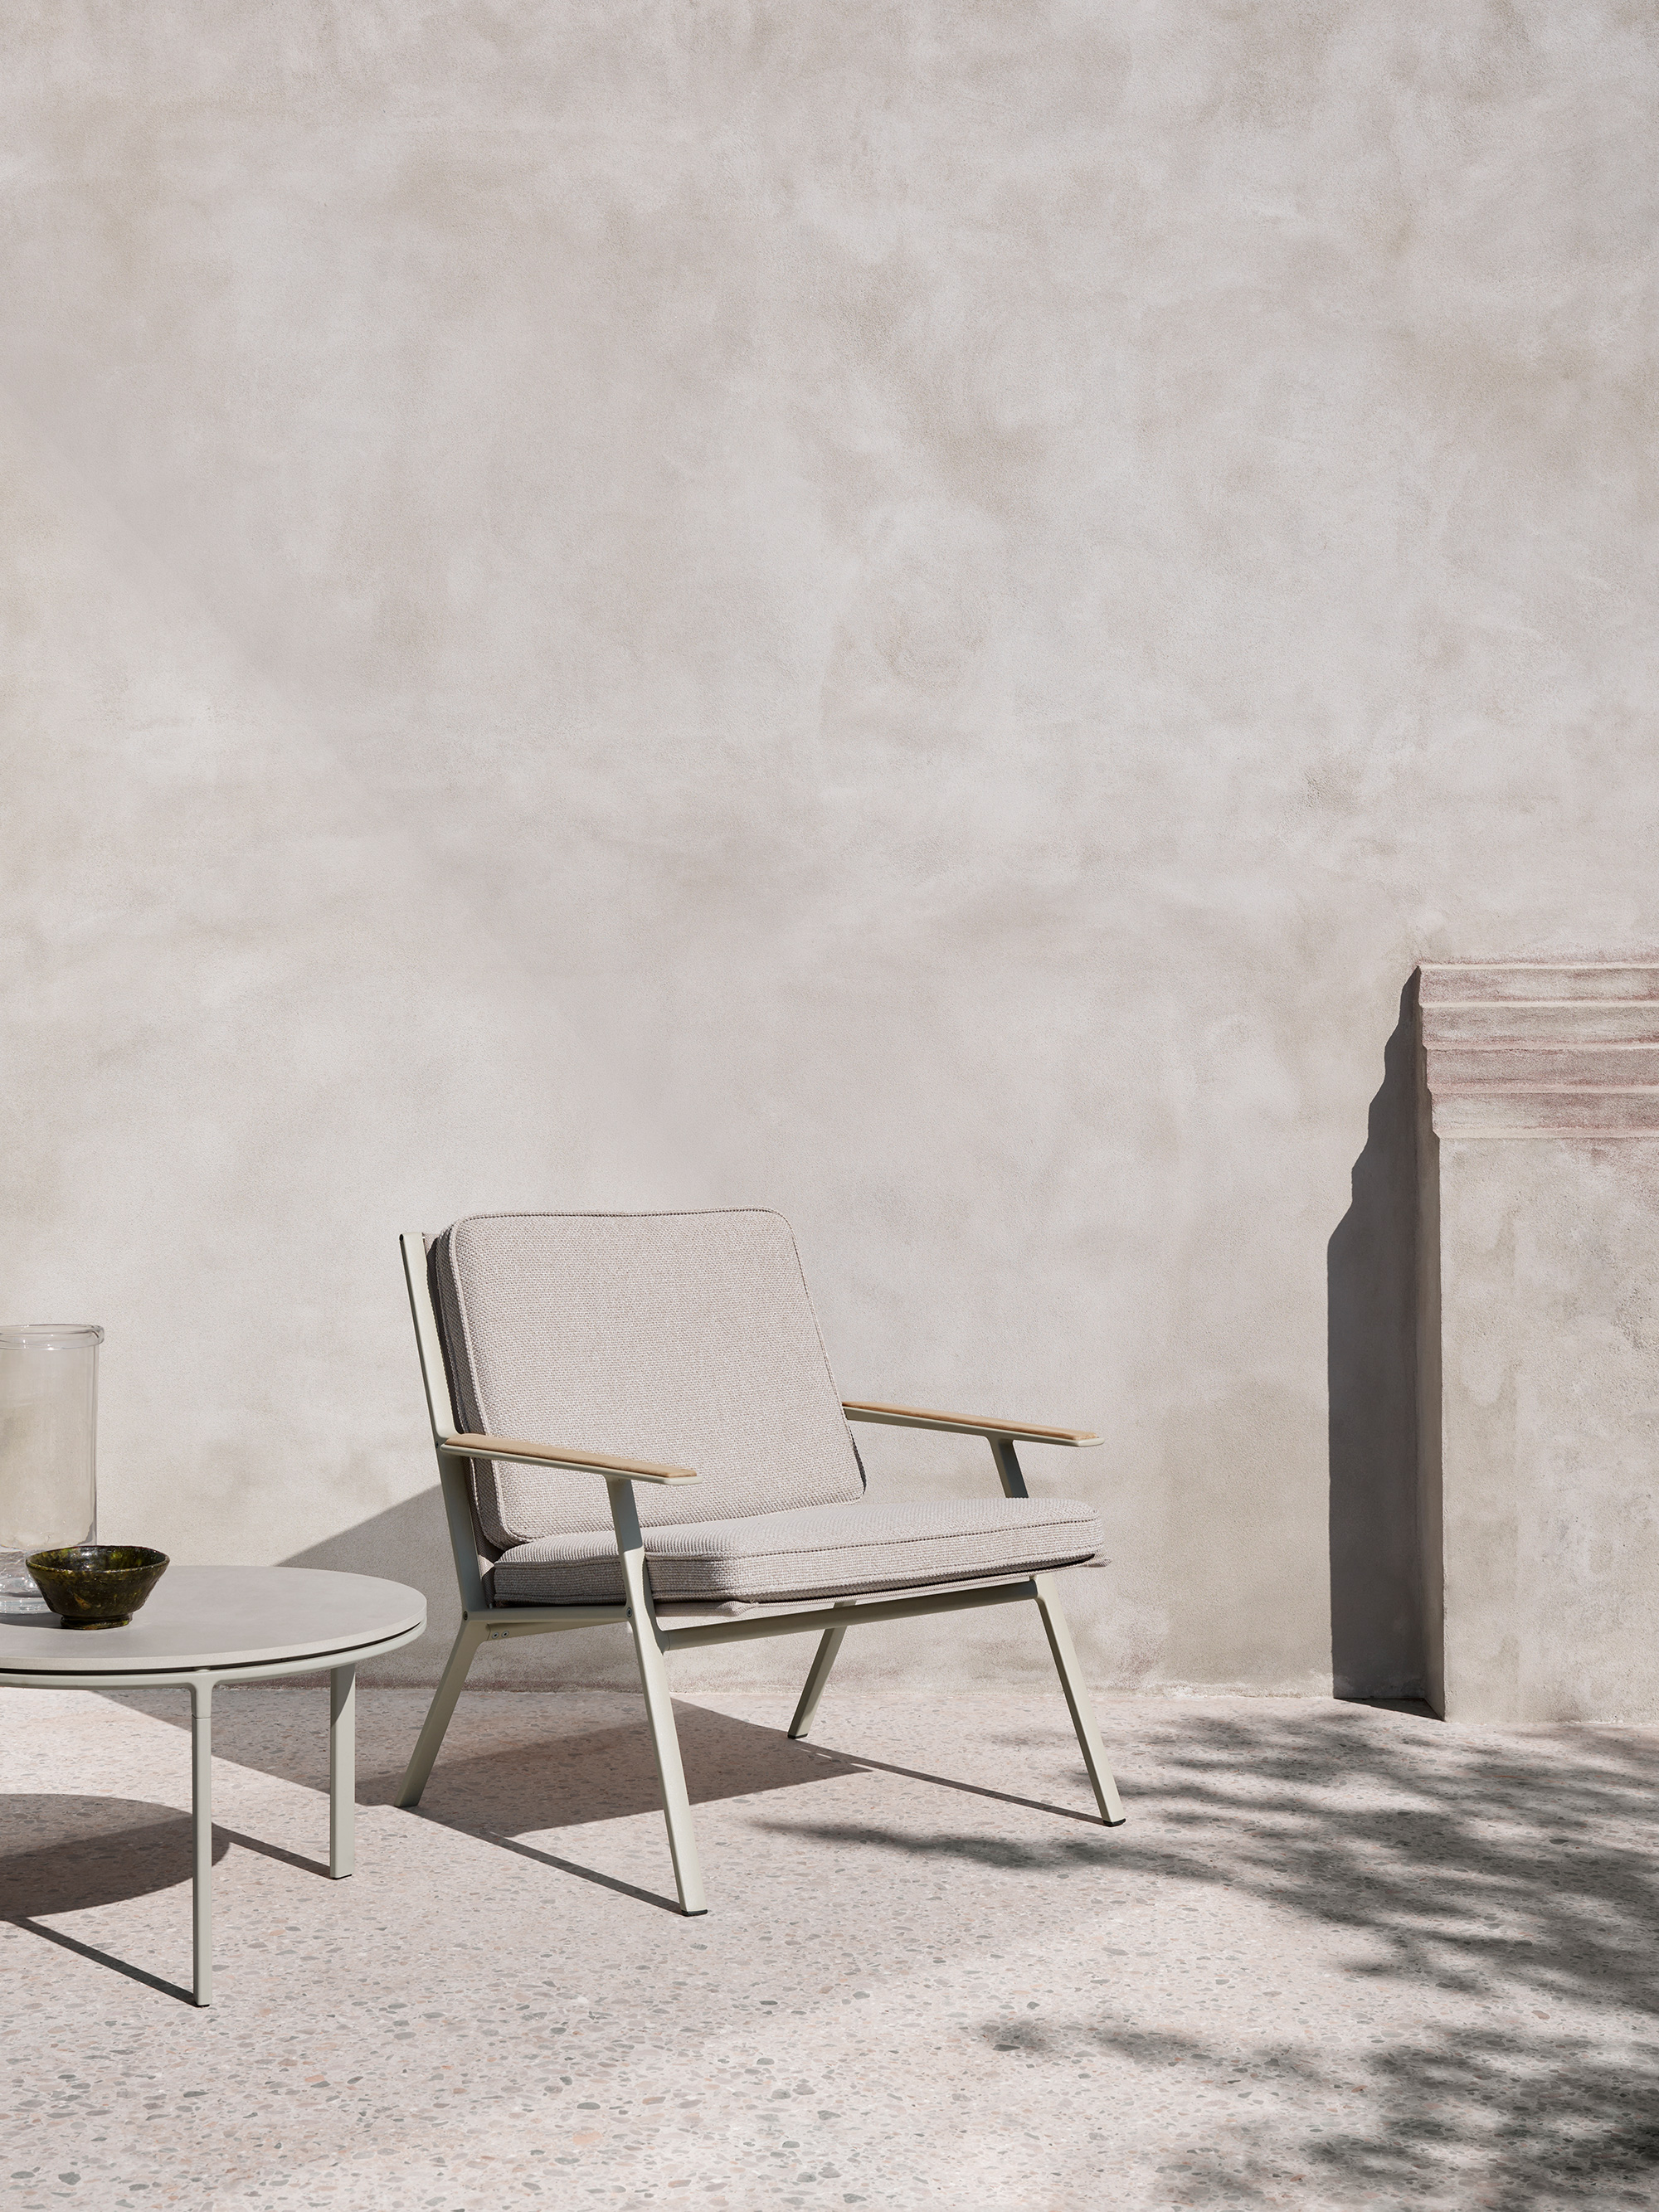 Open-Air, The Vipp Outdoor Furniture Collection - Gessato